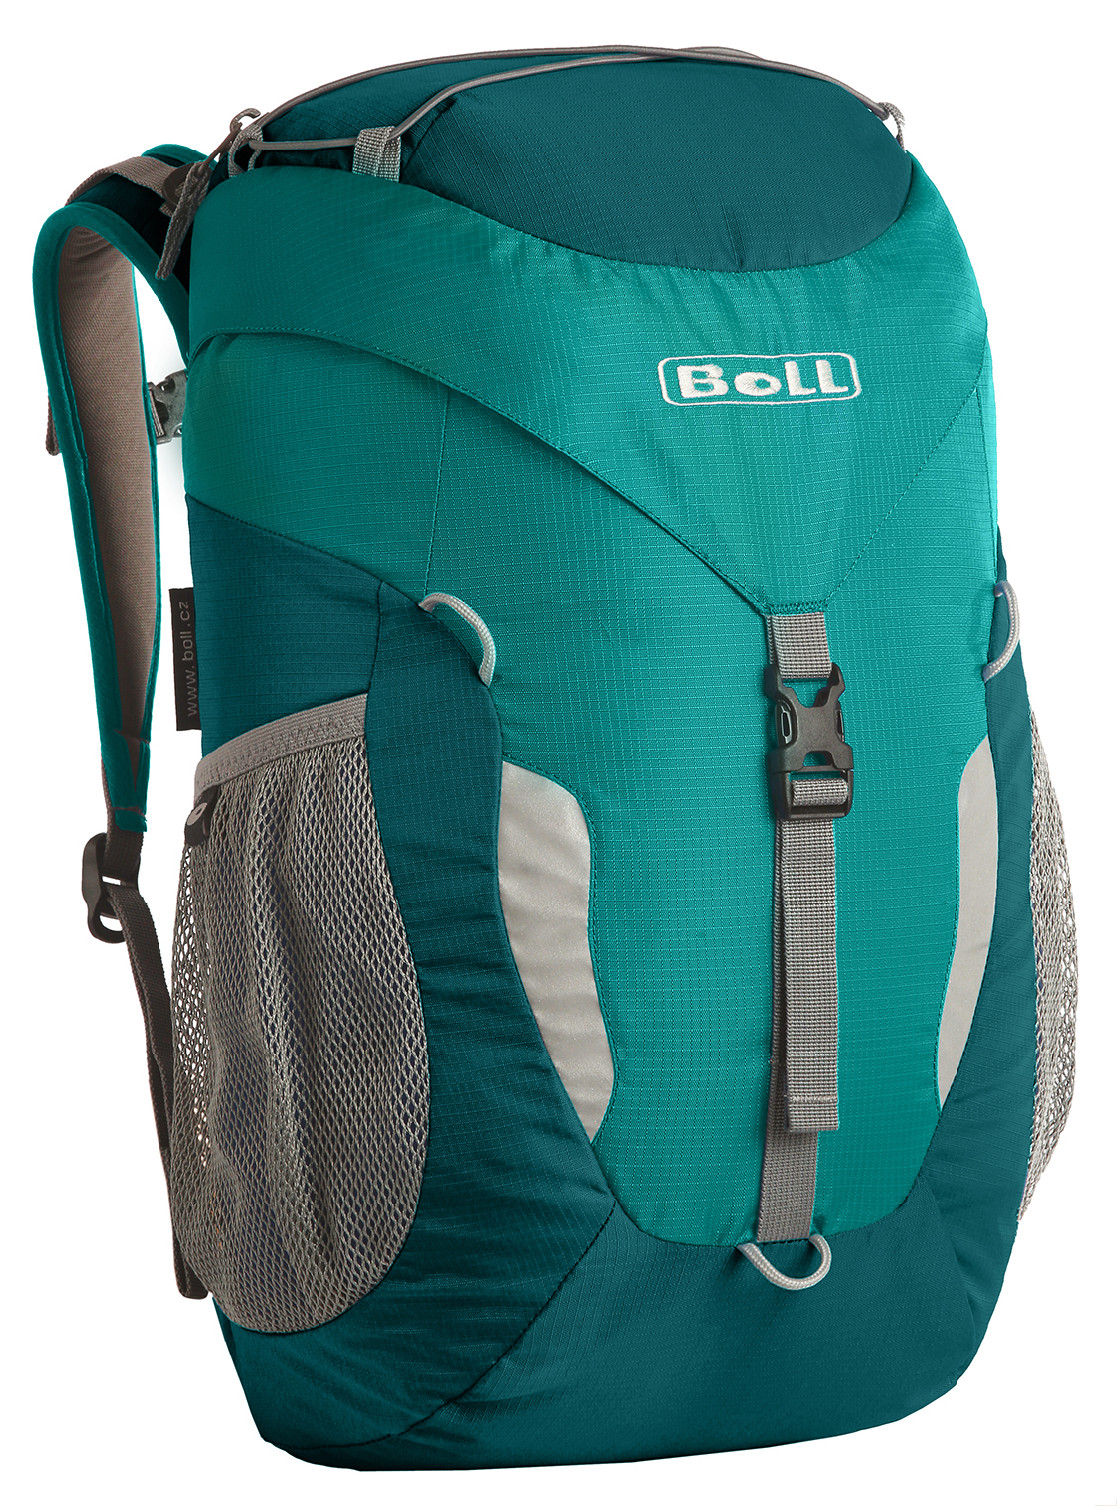 BOLL TRAPPER 18 turquoise teal